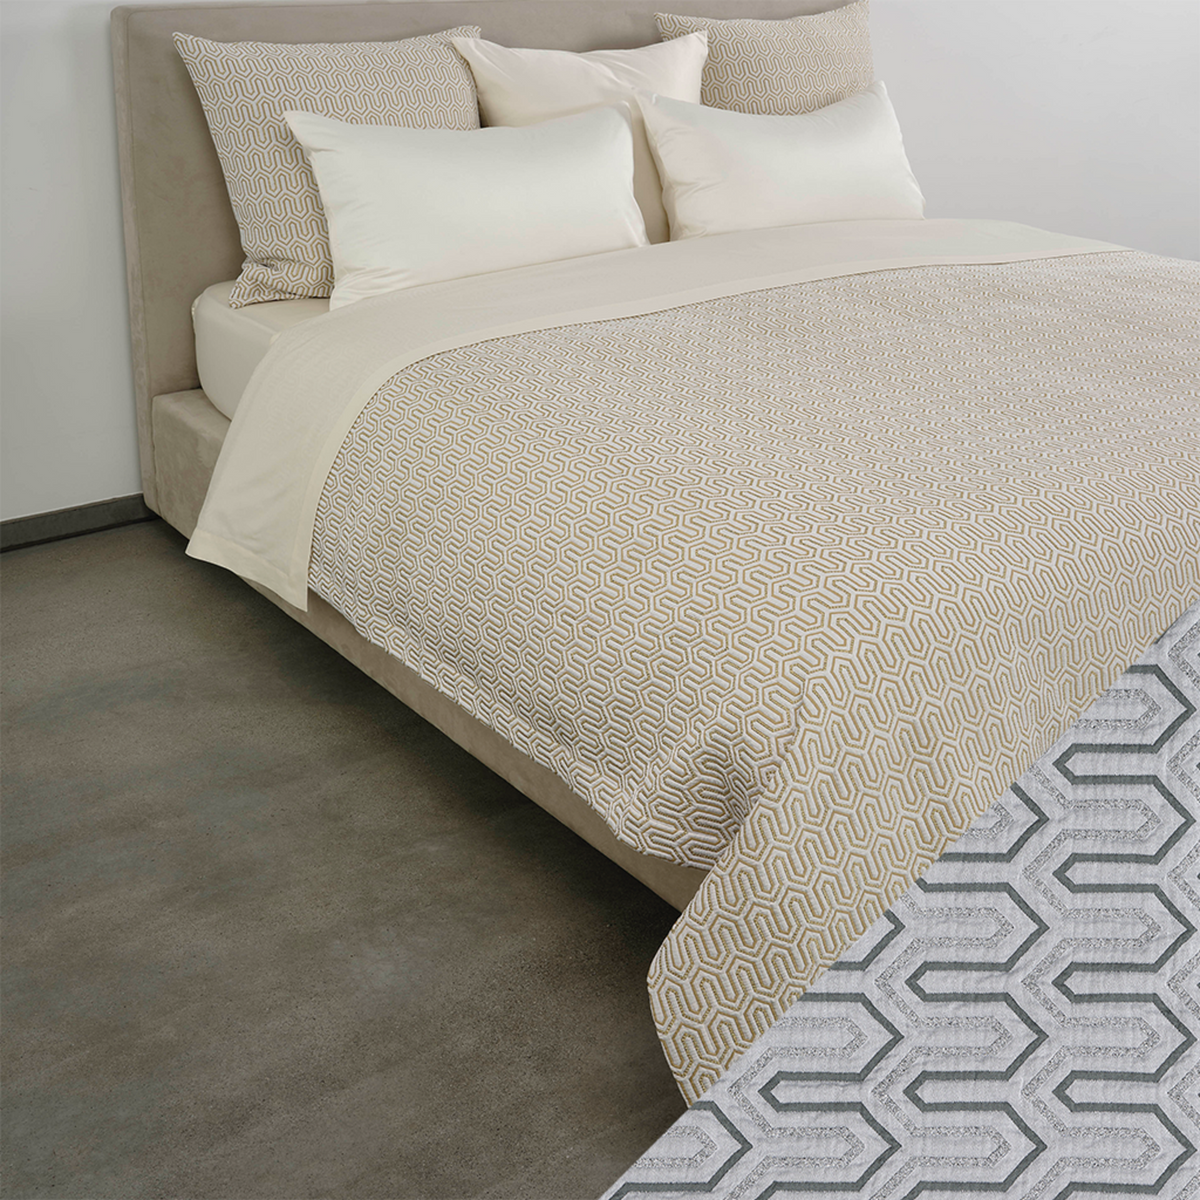 Celso de Lemos Vendome Bedding Collection with Silver Swatch